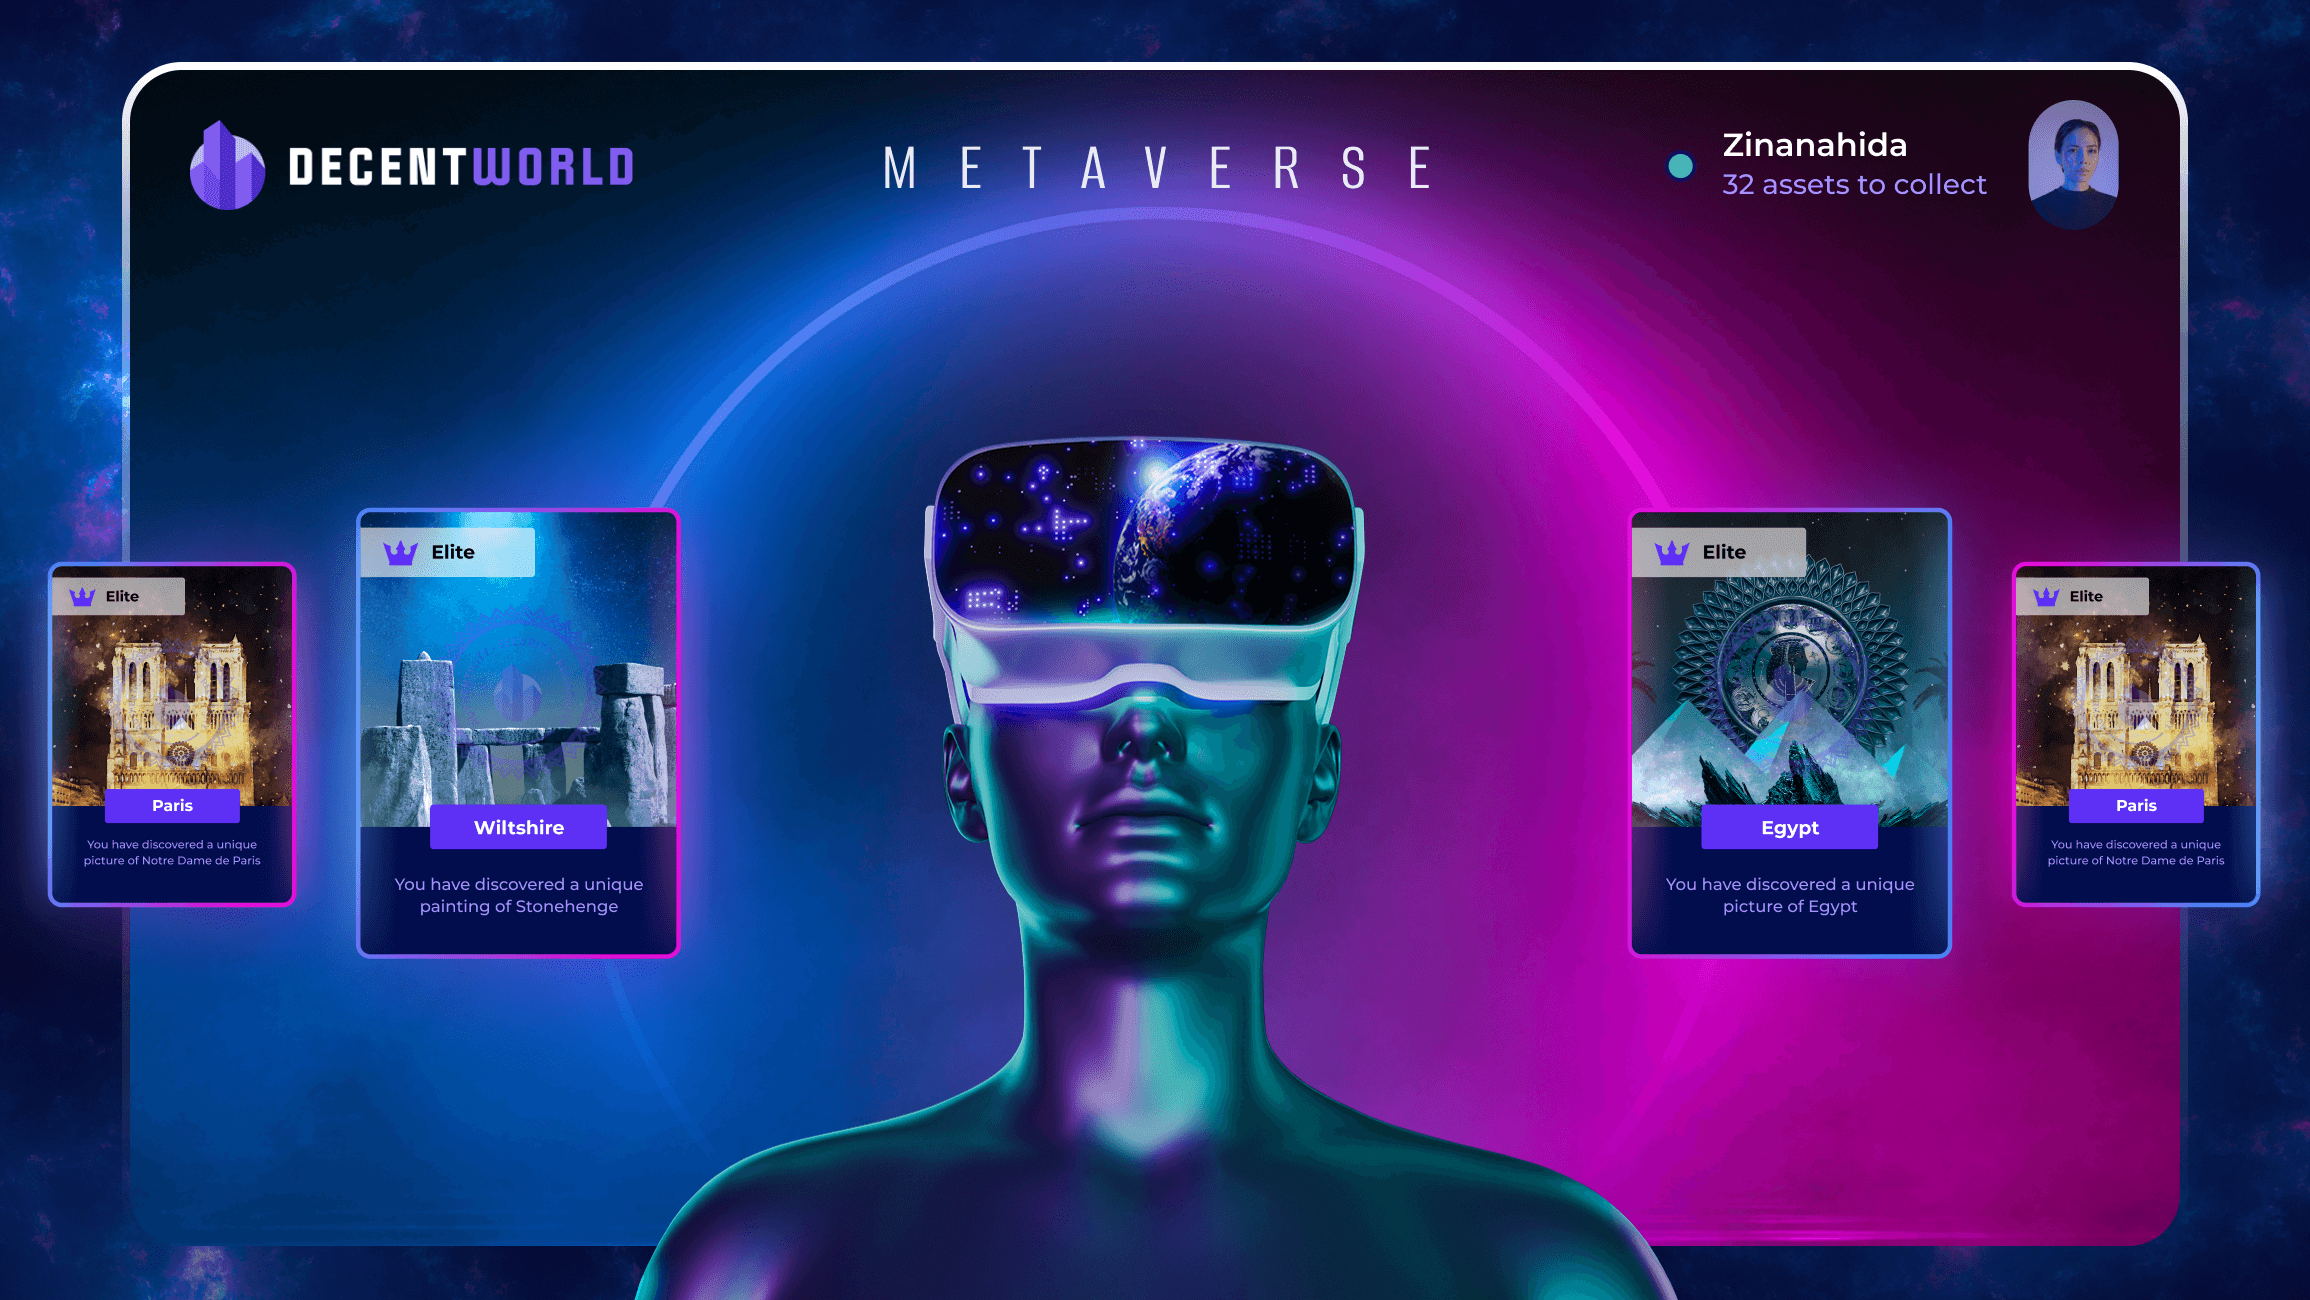 Metaverse - the next version of the Internet